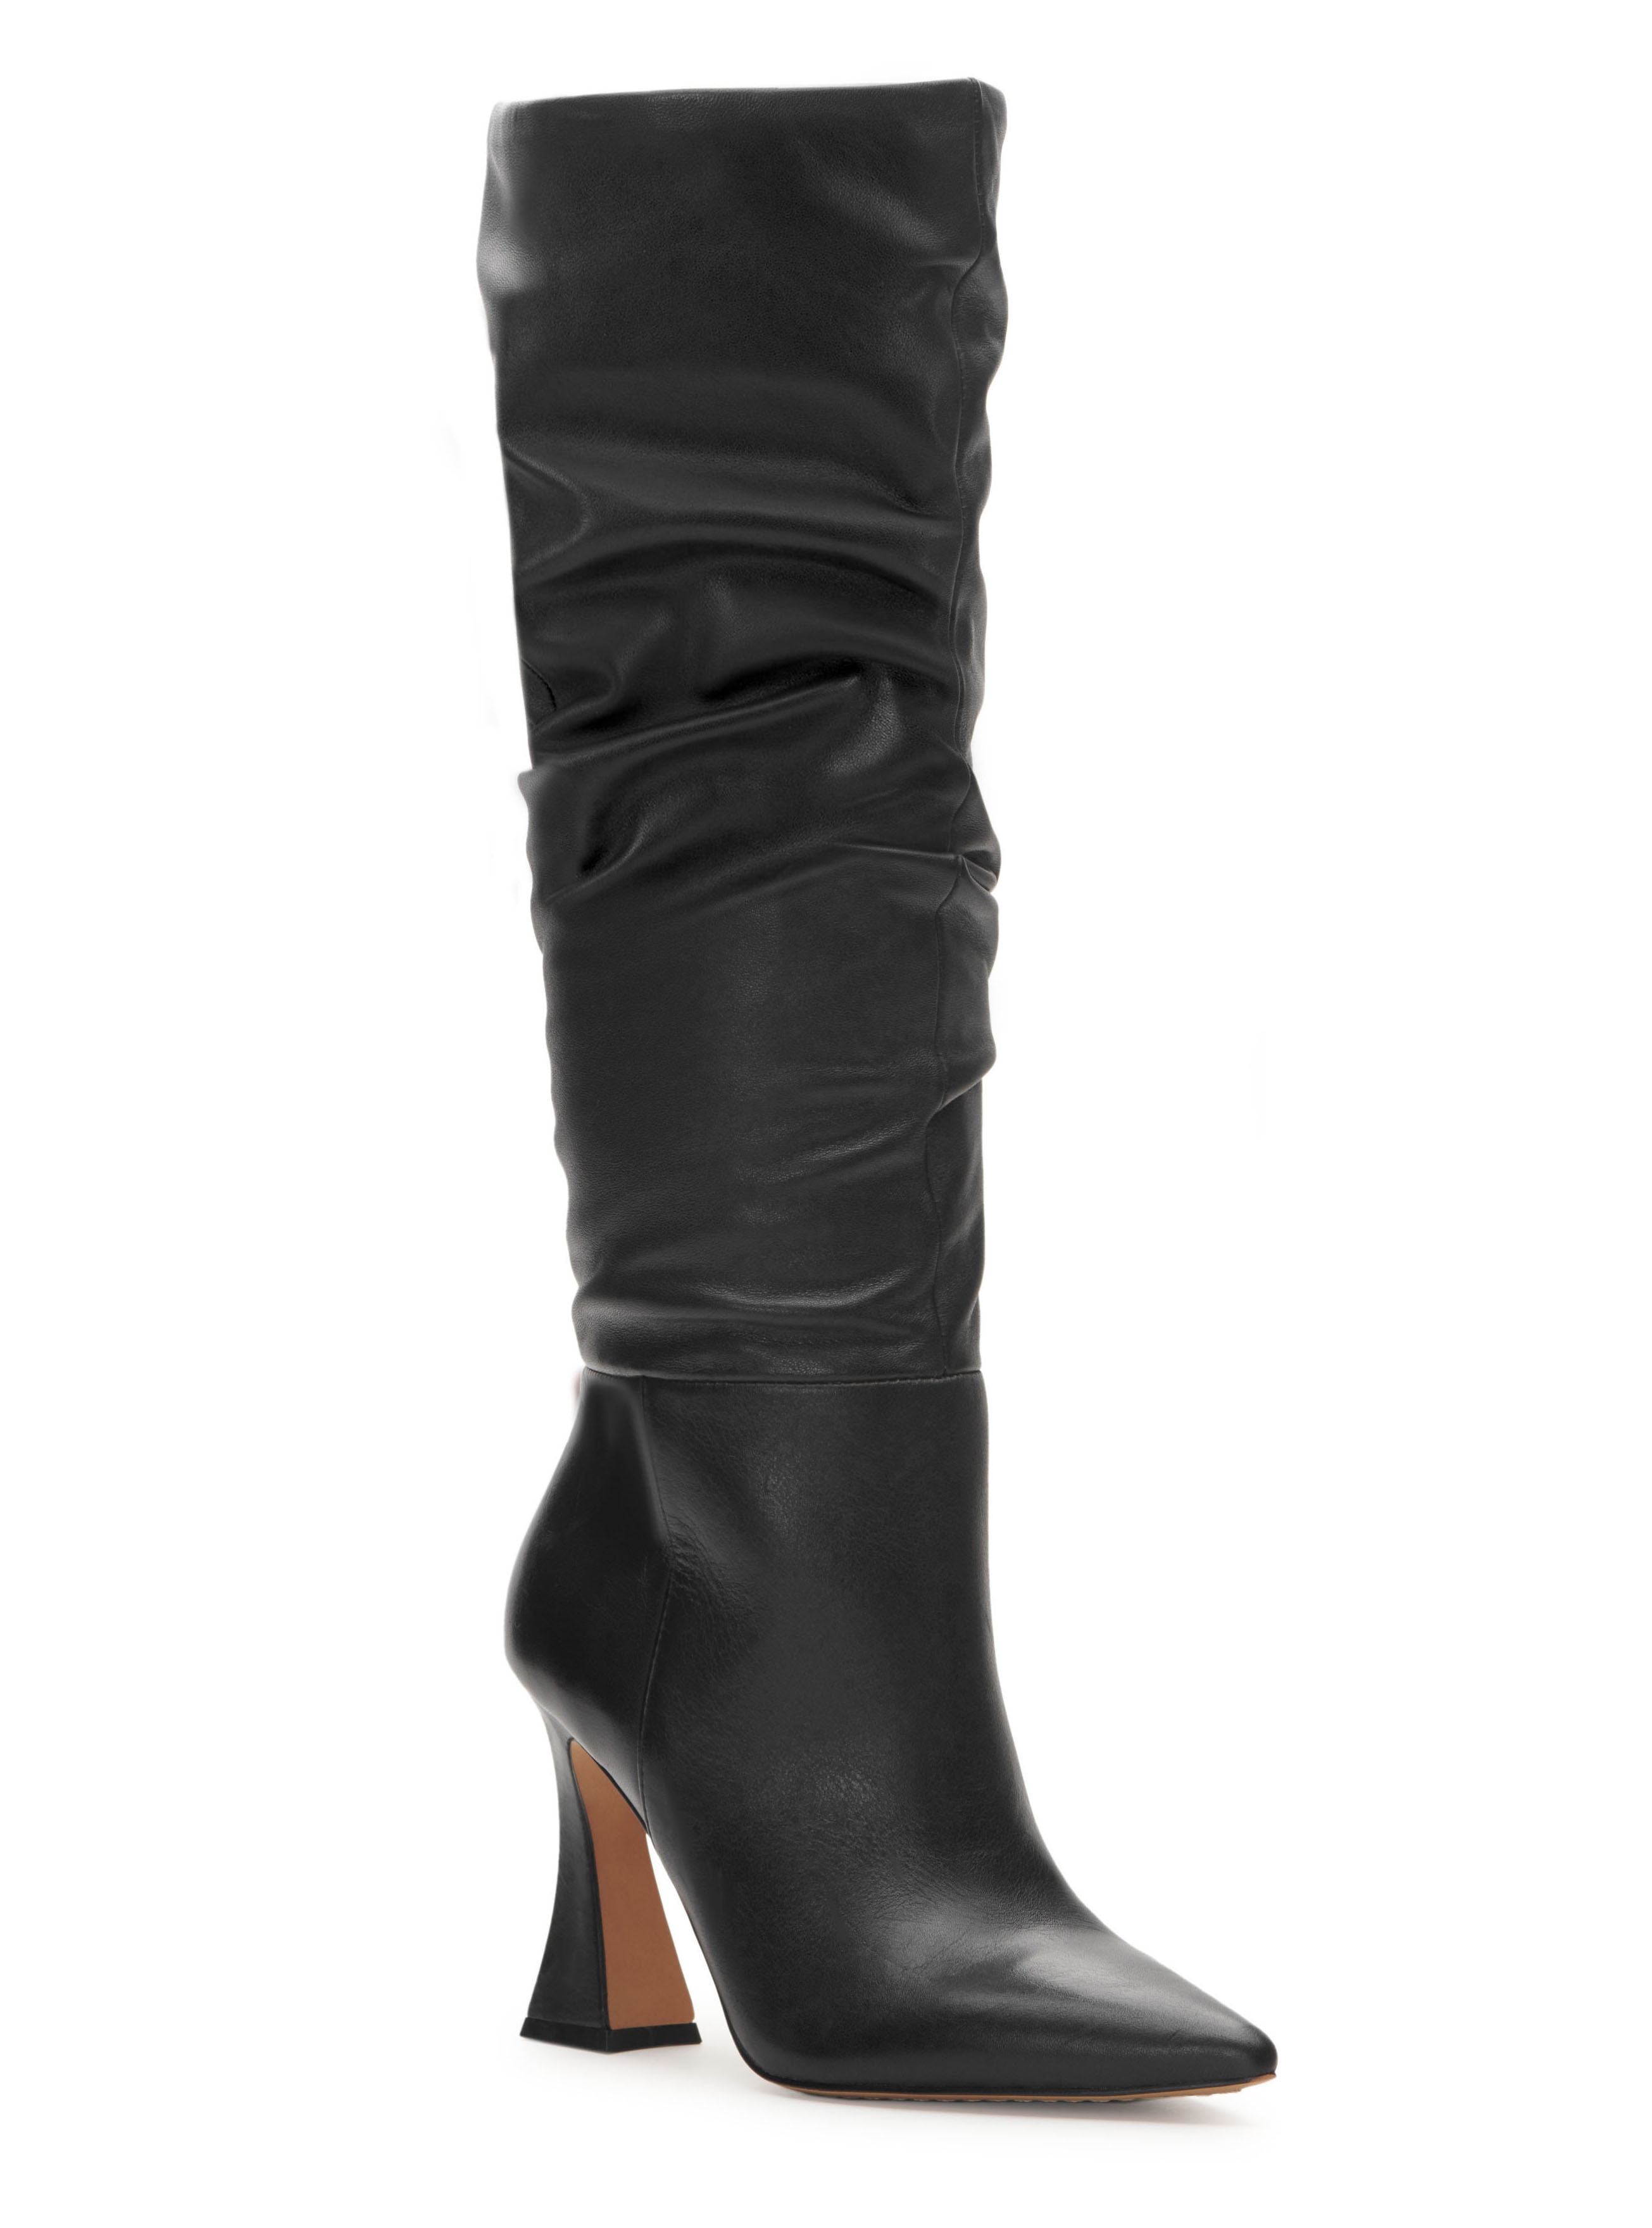 Clothing & Shoes - Shoes - Boots - Vince Camuto Alinkay Pointy Toe